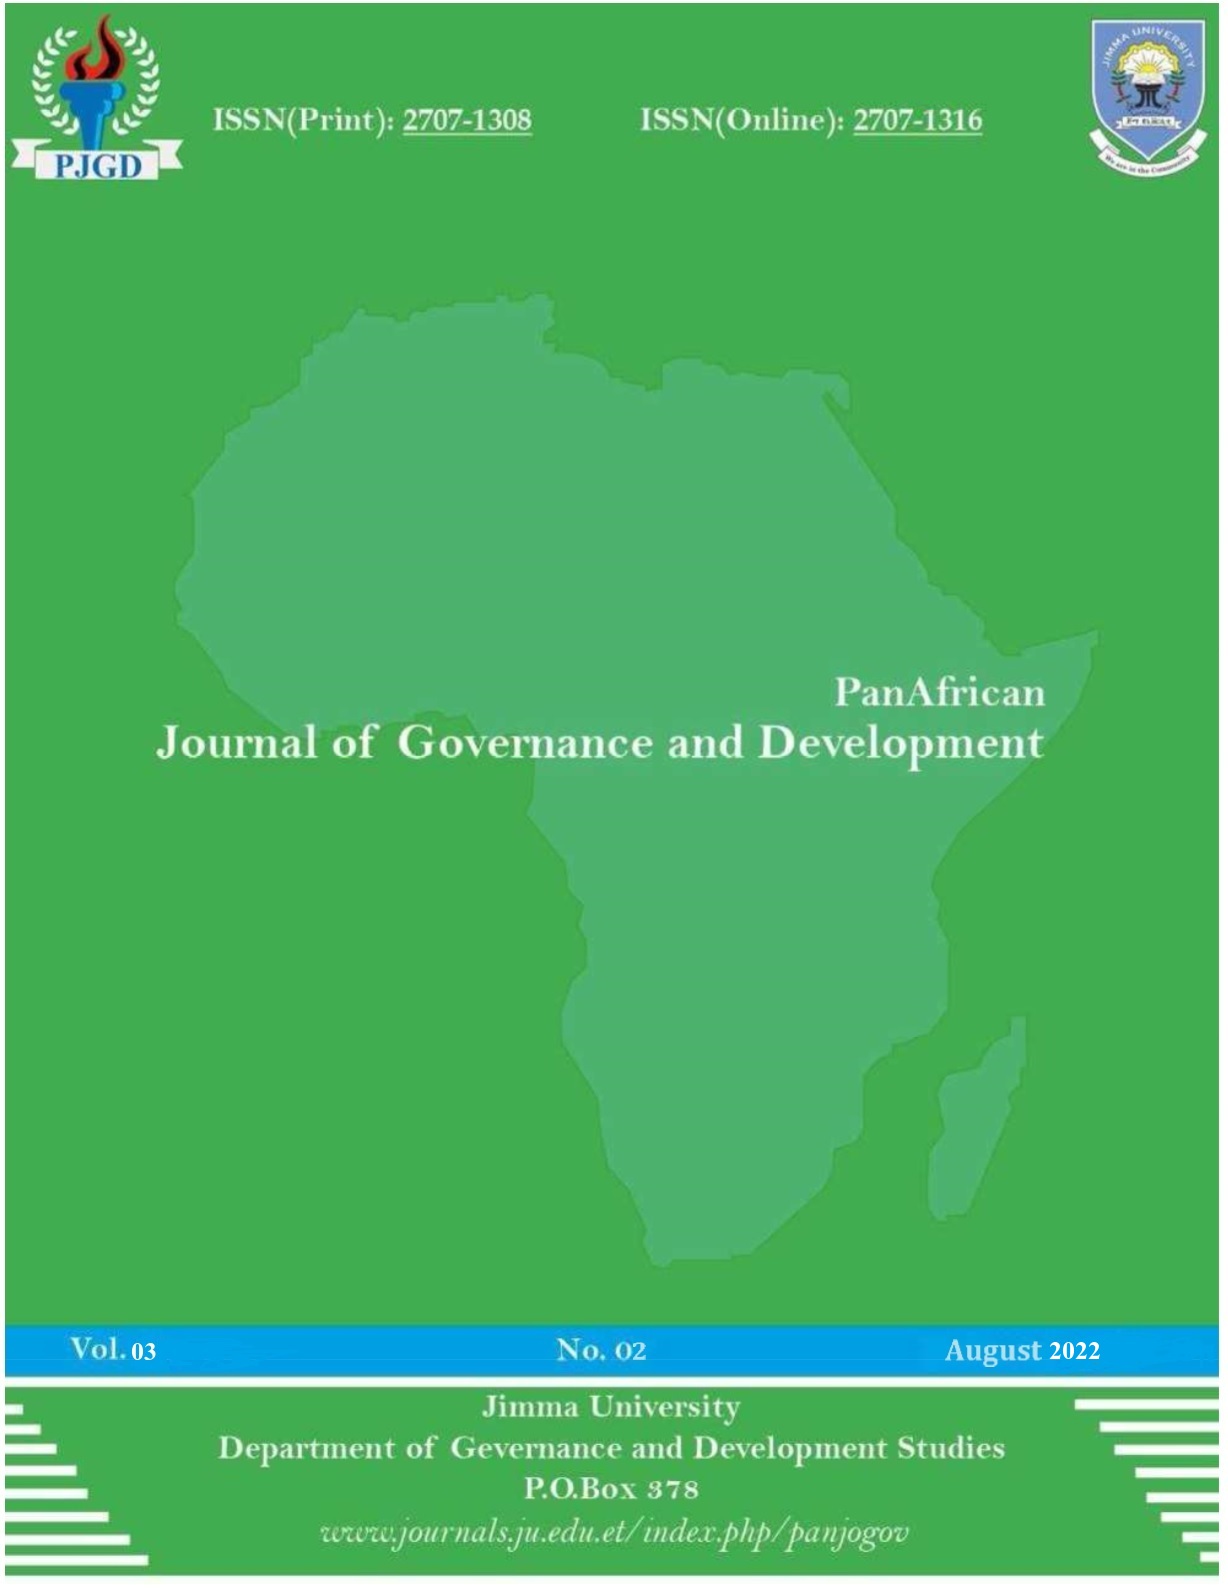 PanAfrican Journal of Governance and Development